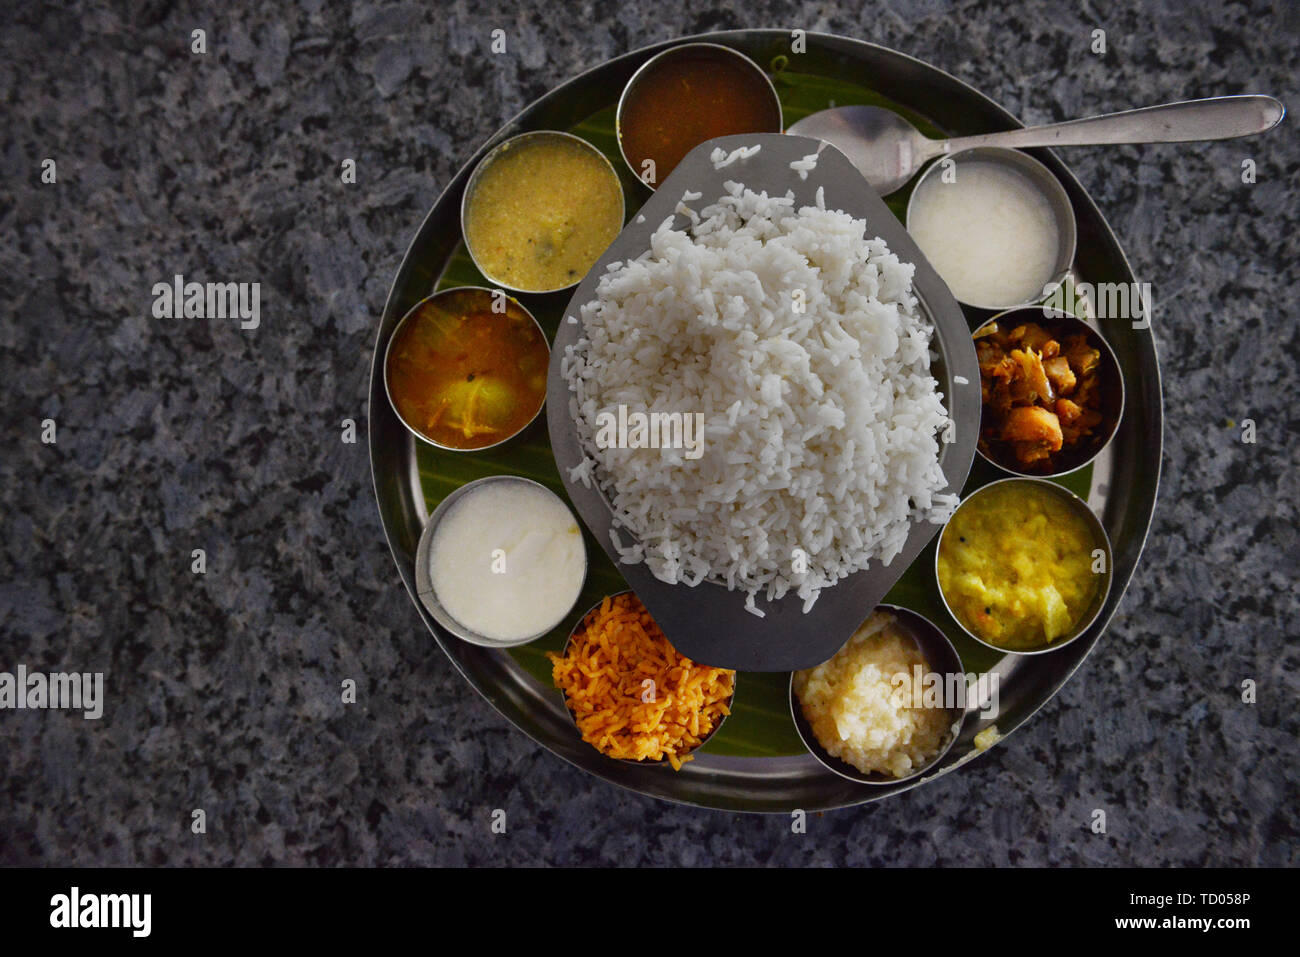 A traditional South Indian Thali dish served in a restaurant in Tamil Nadu, India. Stock Photo